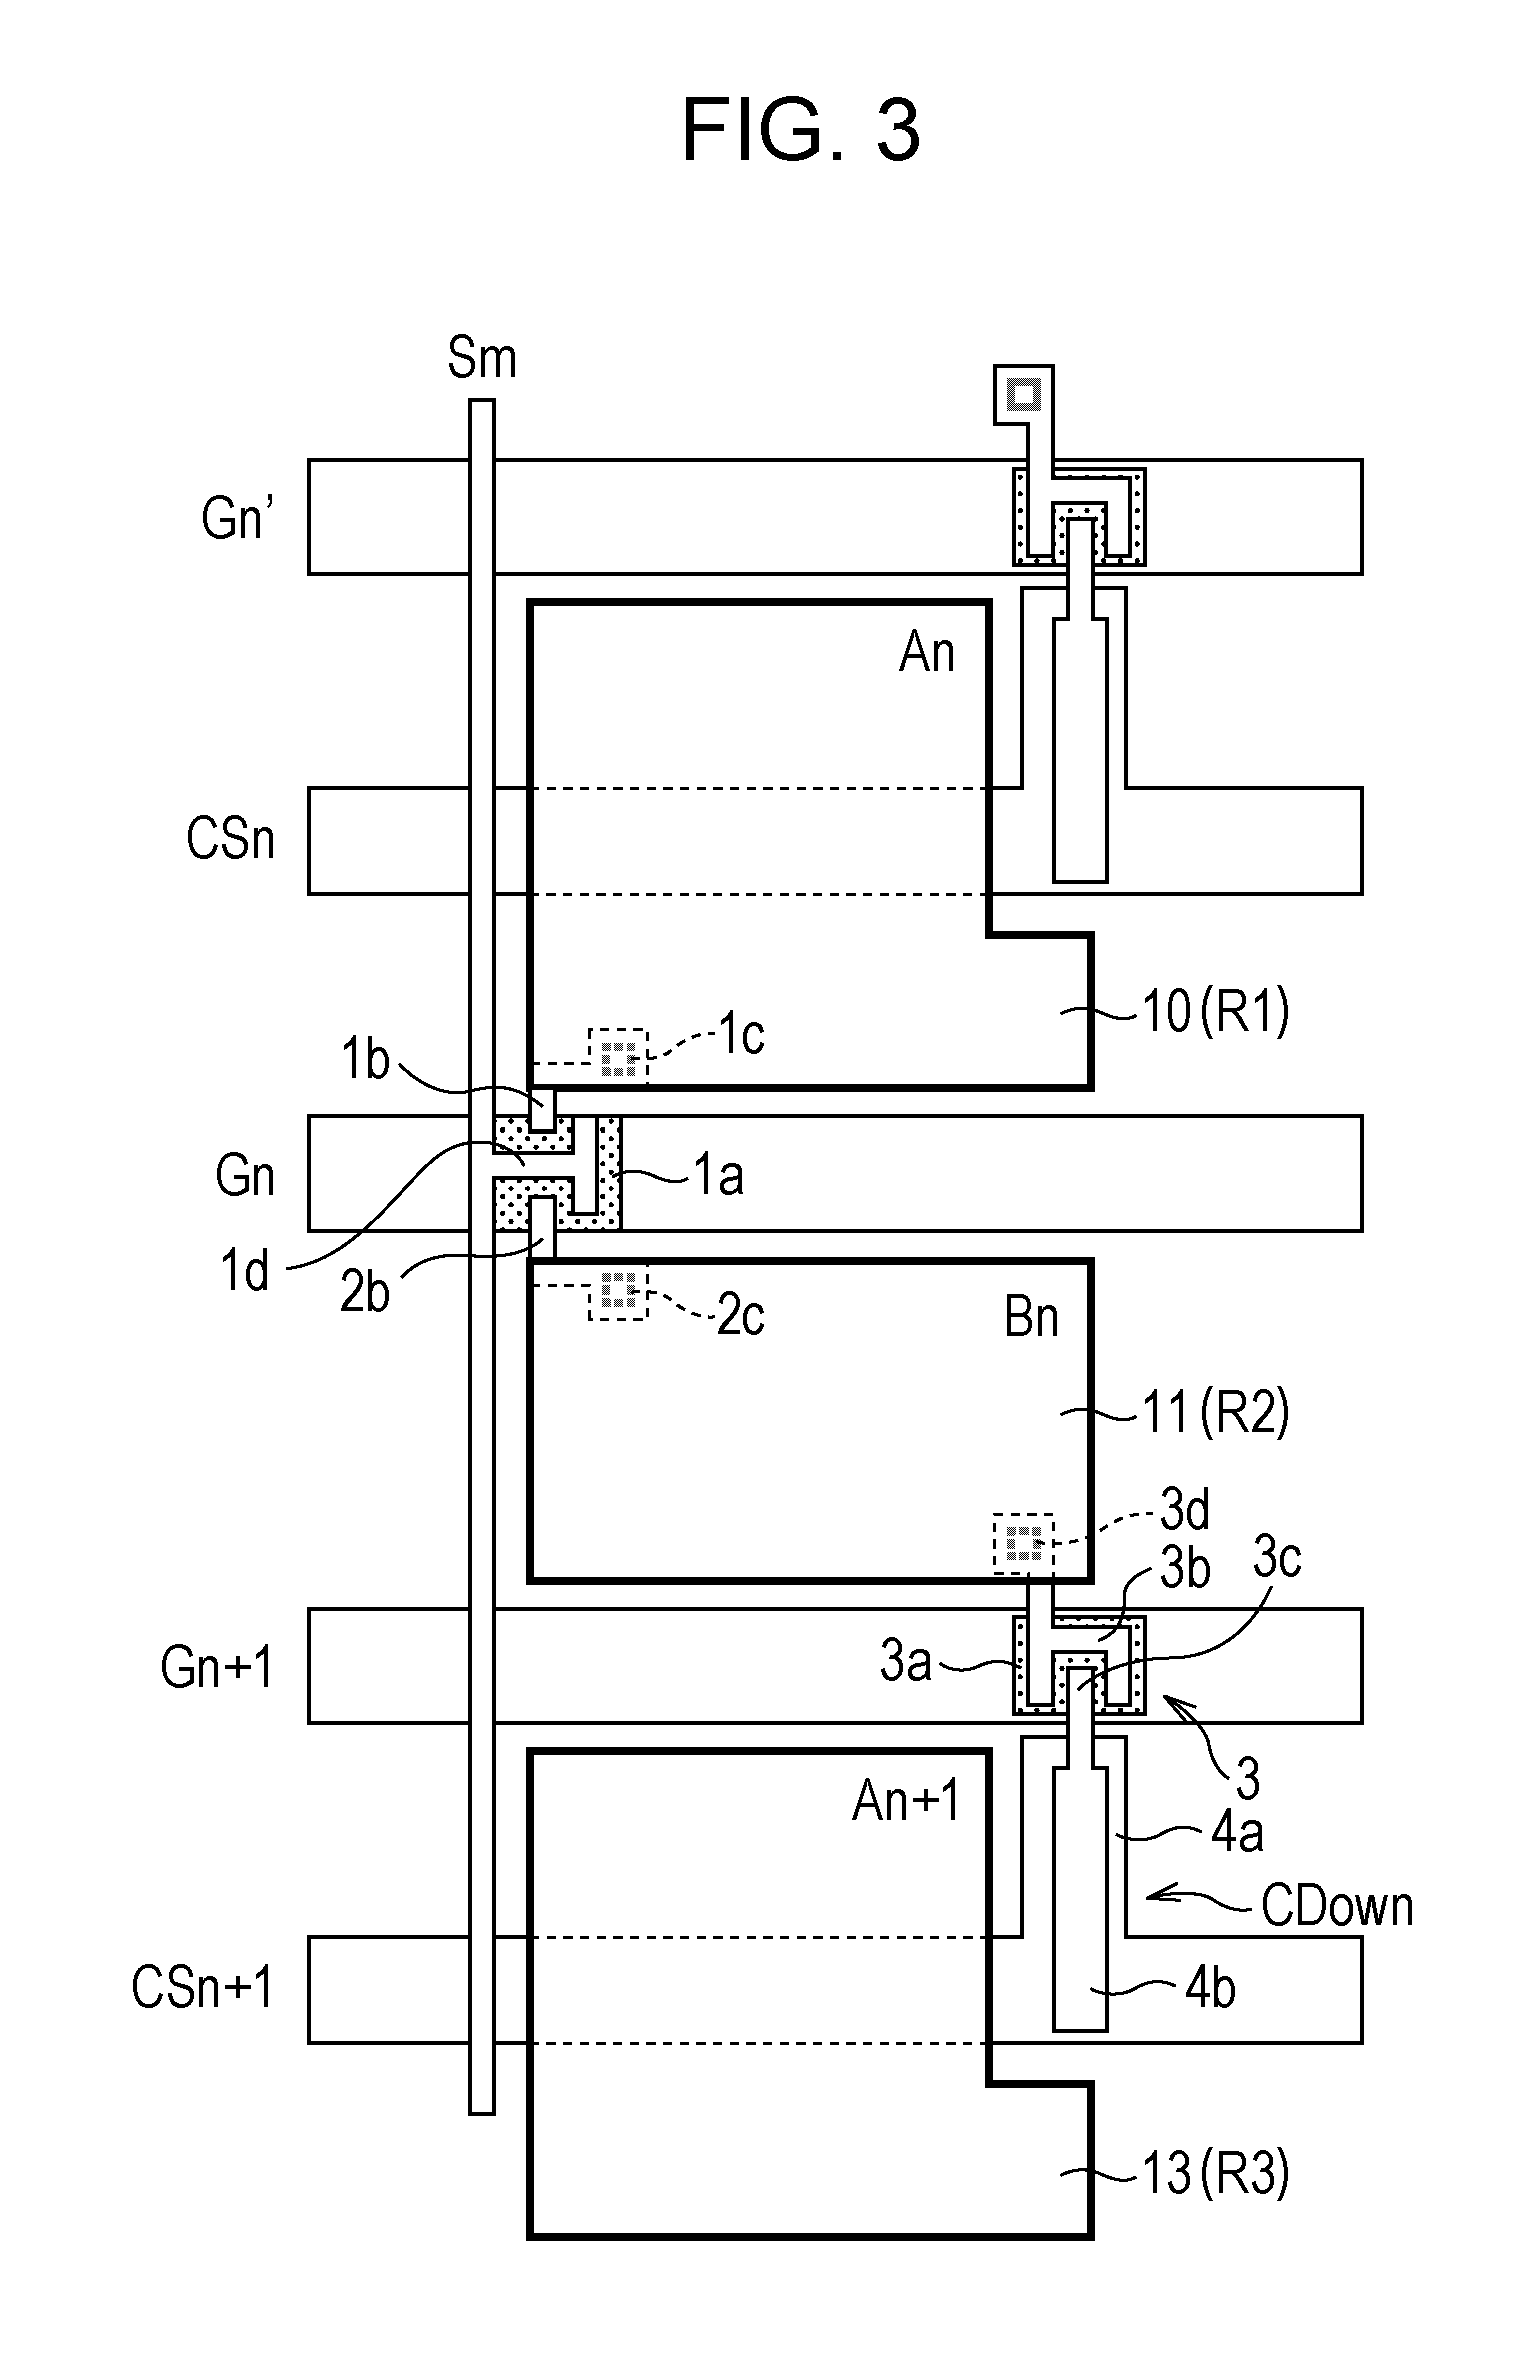 Liquid crystal display device, display apparatus, and gate signal line driving method